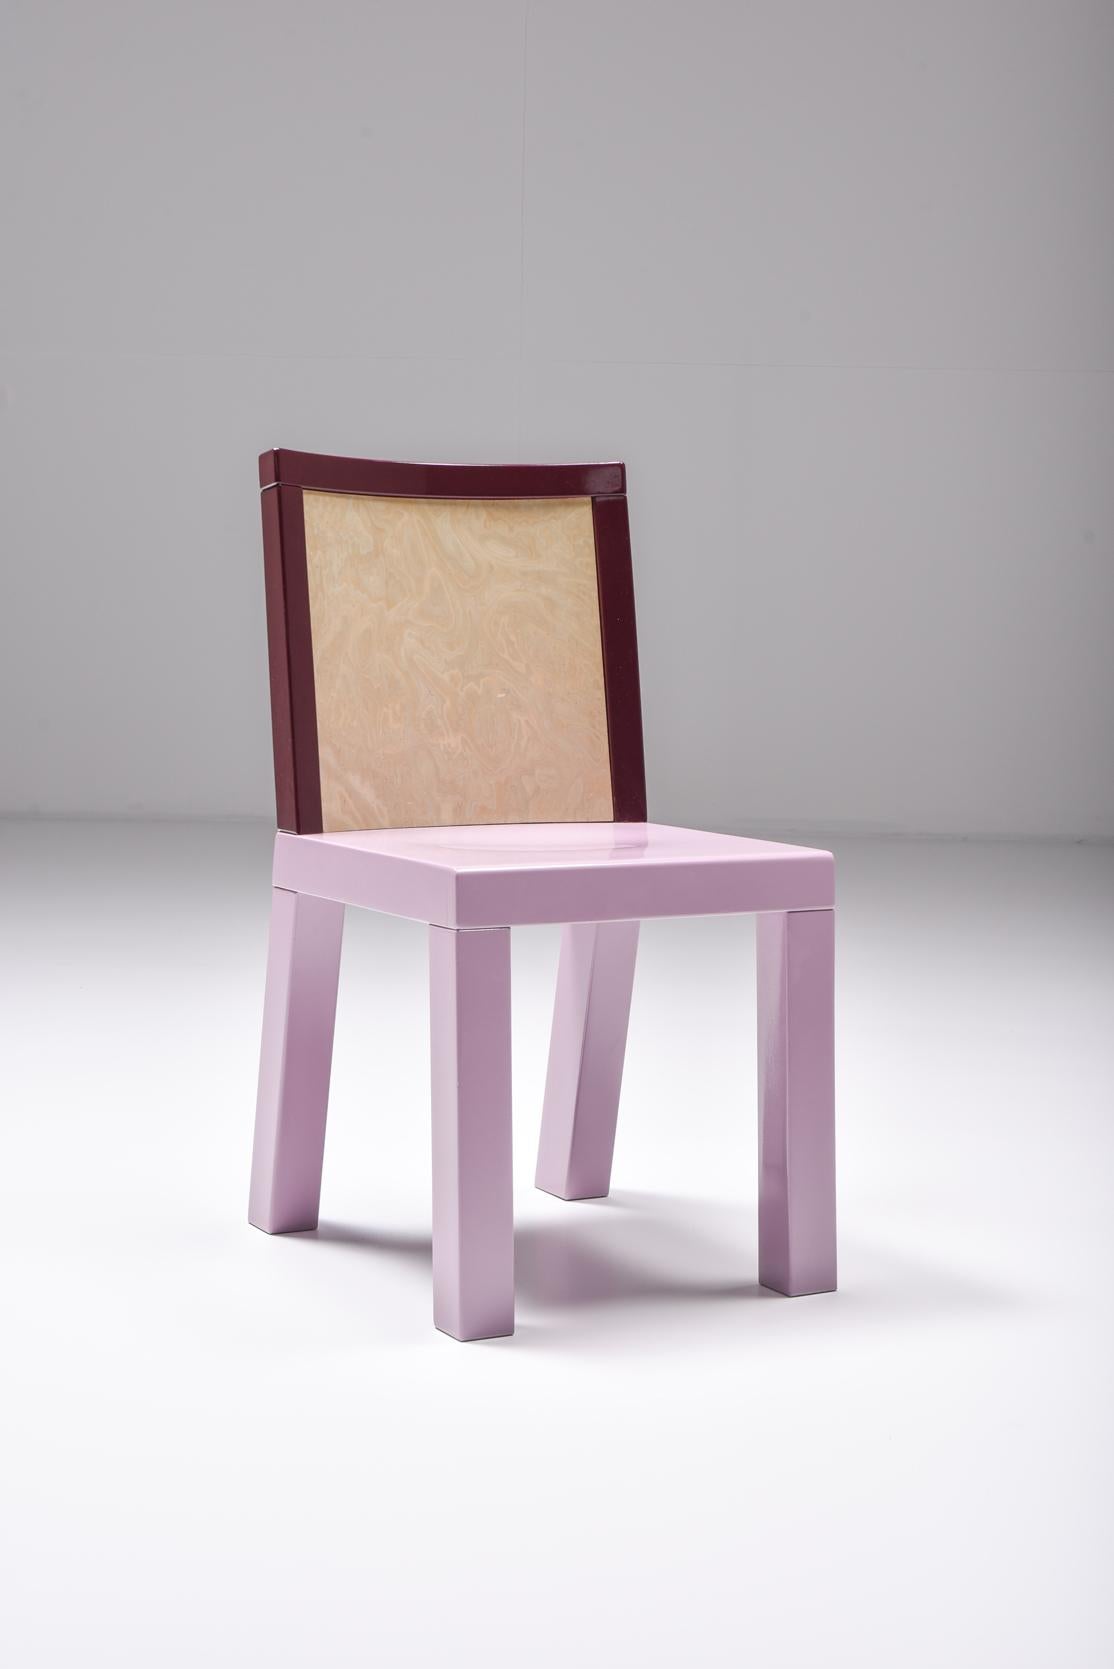 Postmodern Ettore Sottsass Pink Dining Chairs for Leitner, 1980s For Sale 2